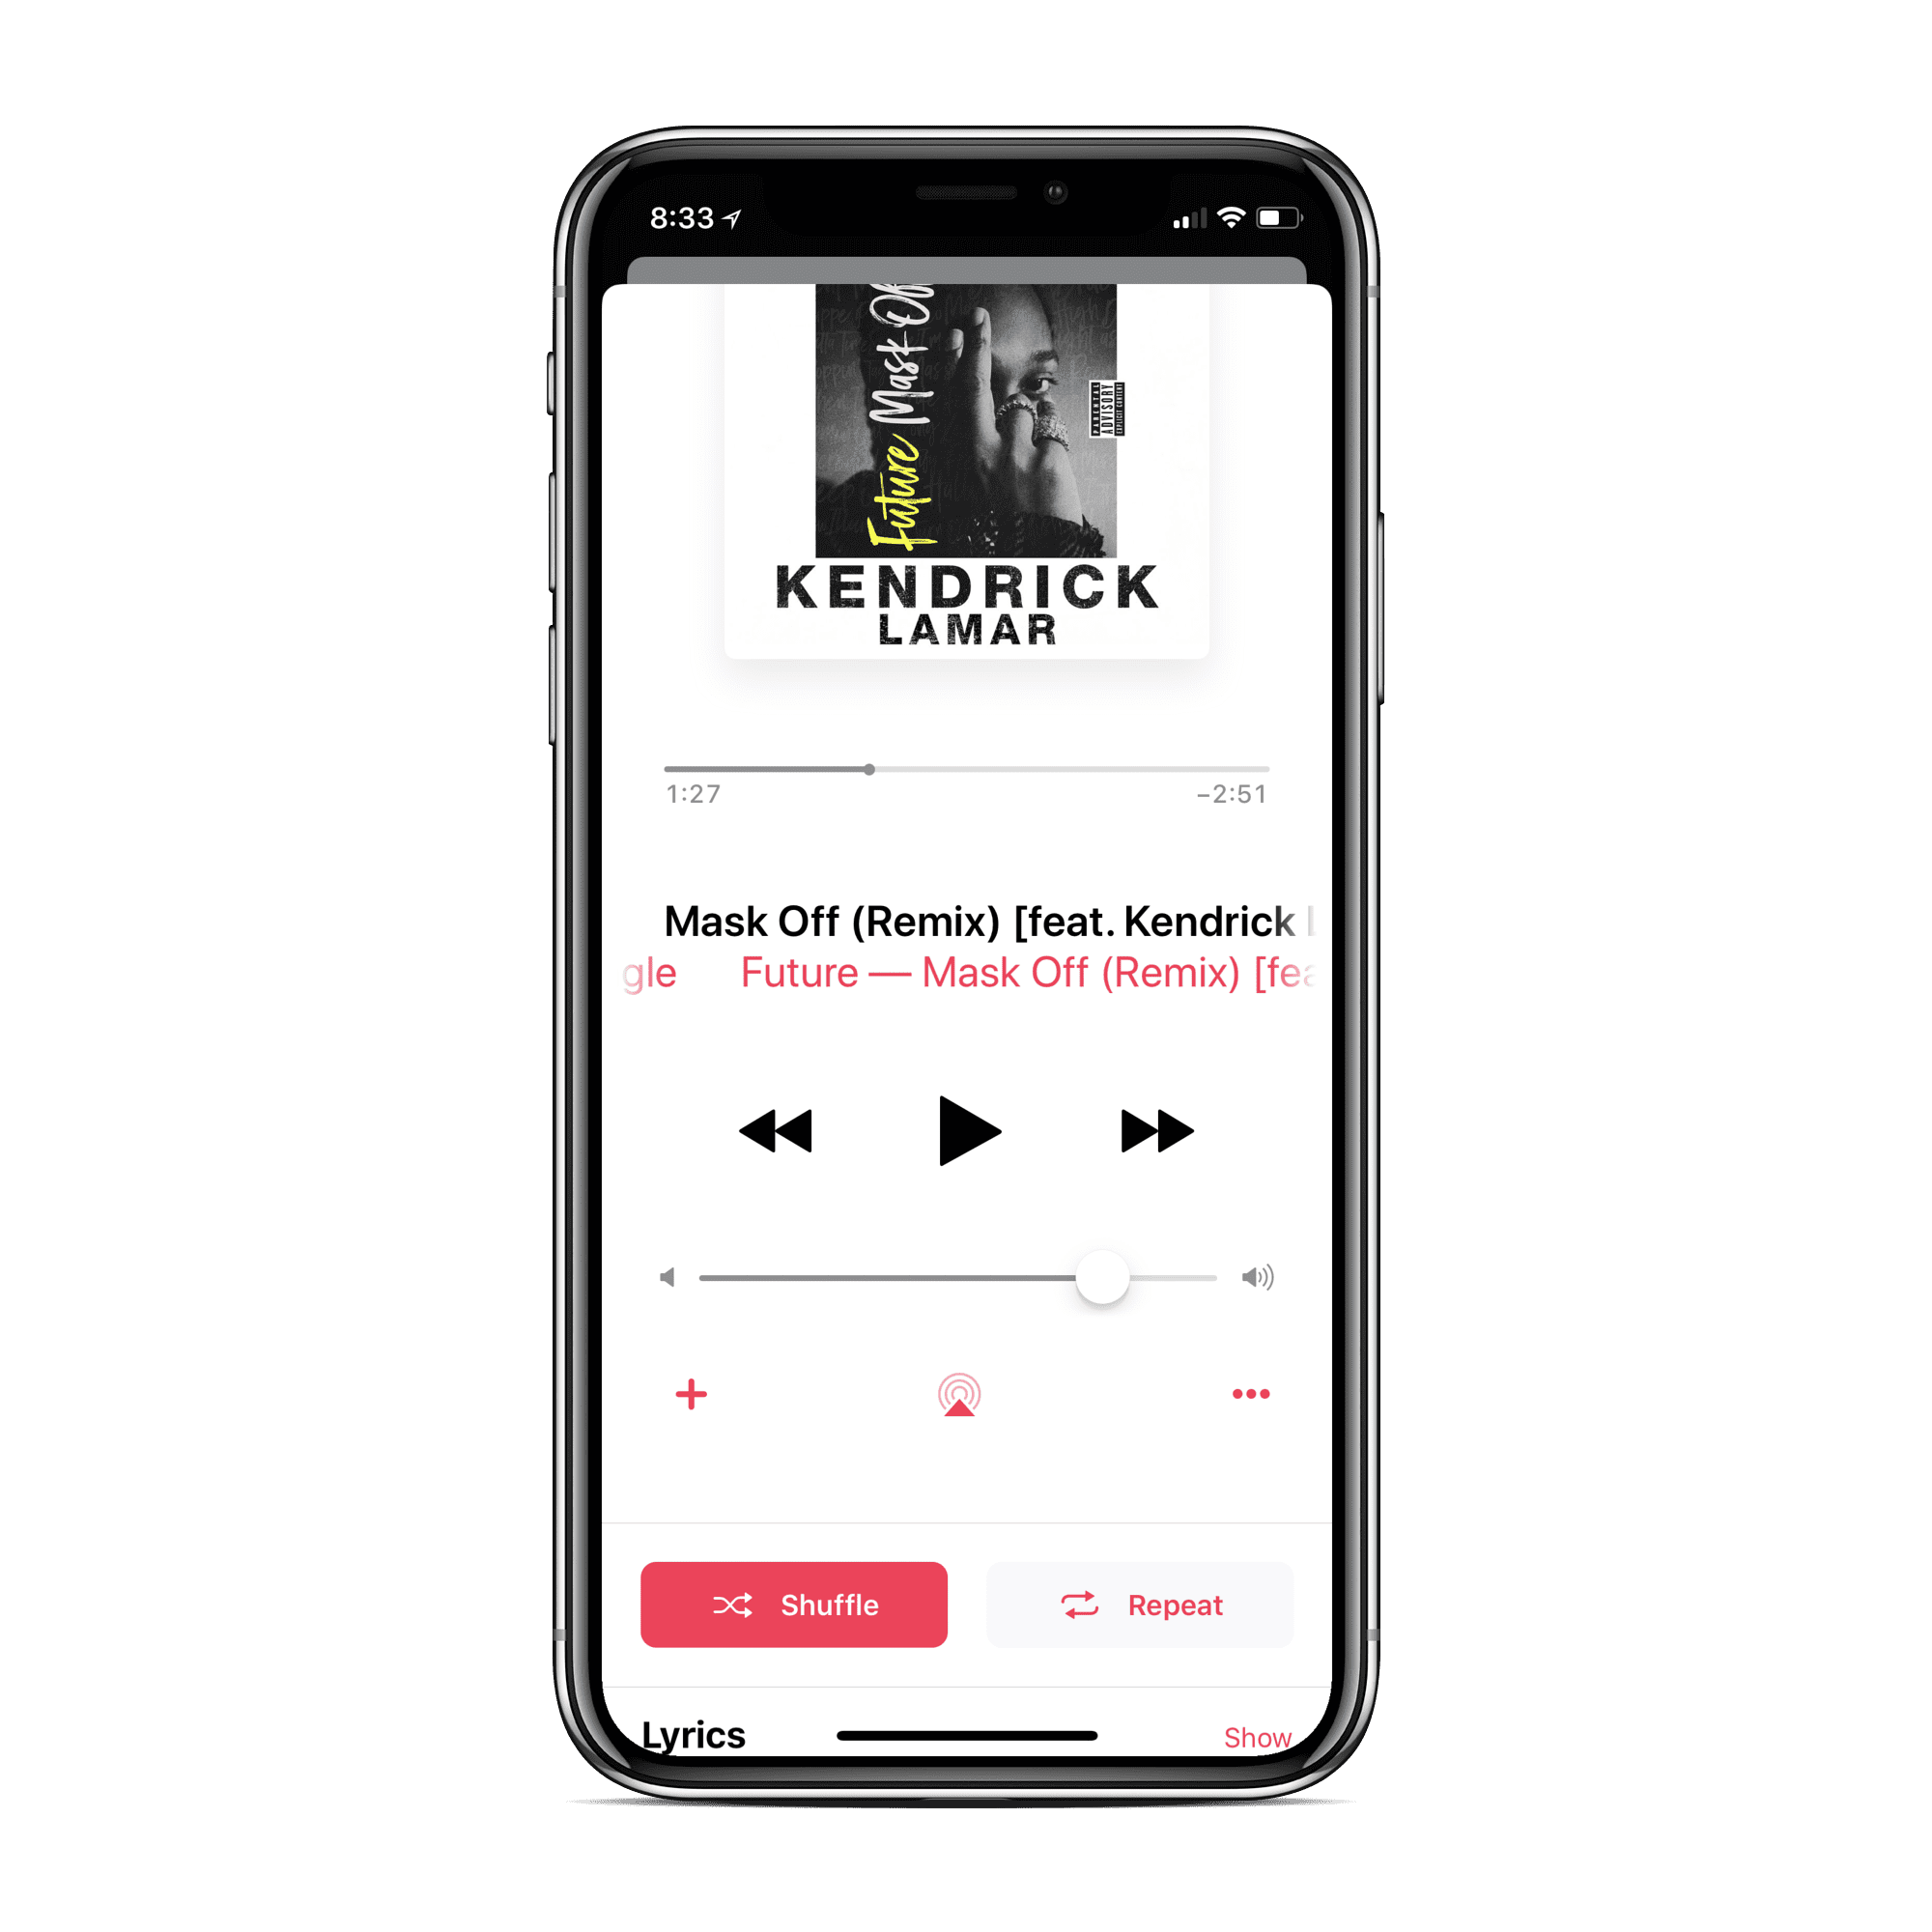 How To Shuffle And Repeat Songs On The Iphone With Apple Music Appletoolbox